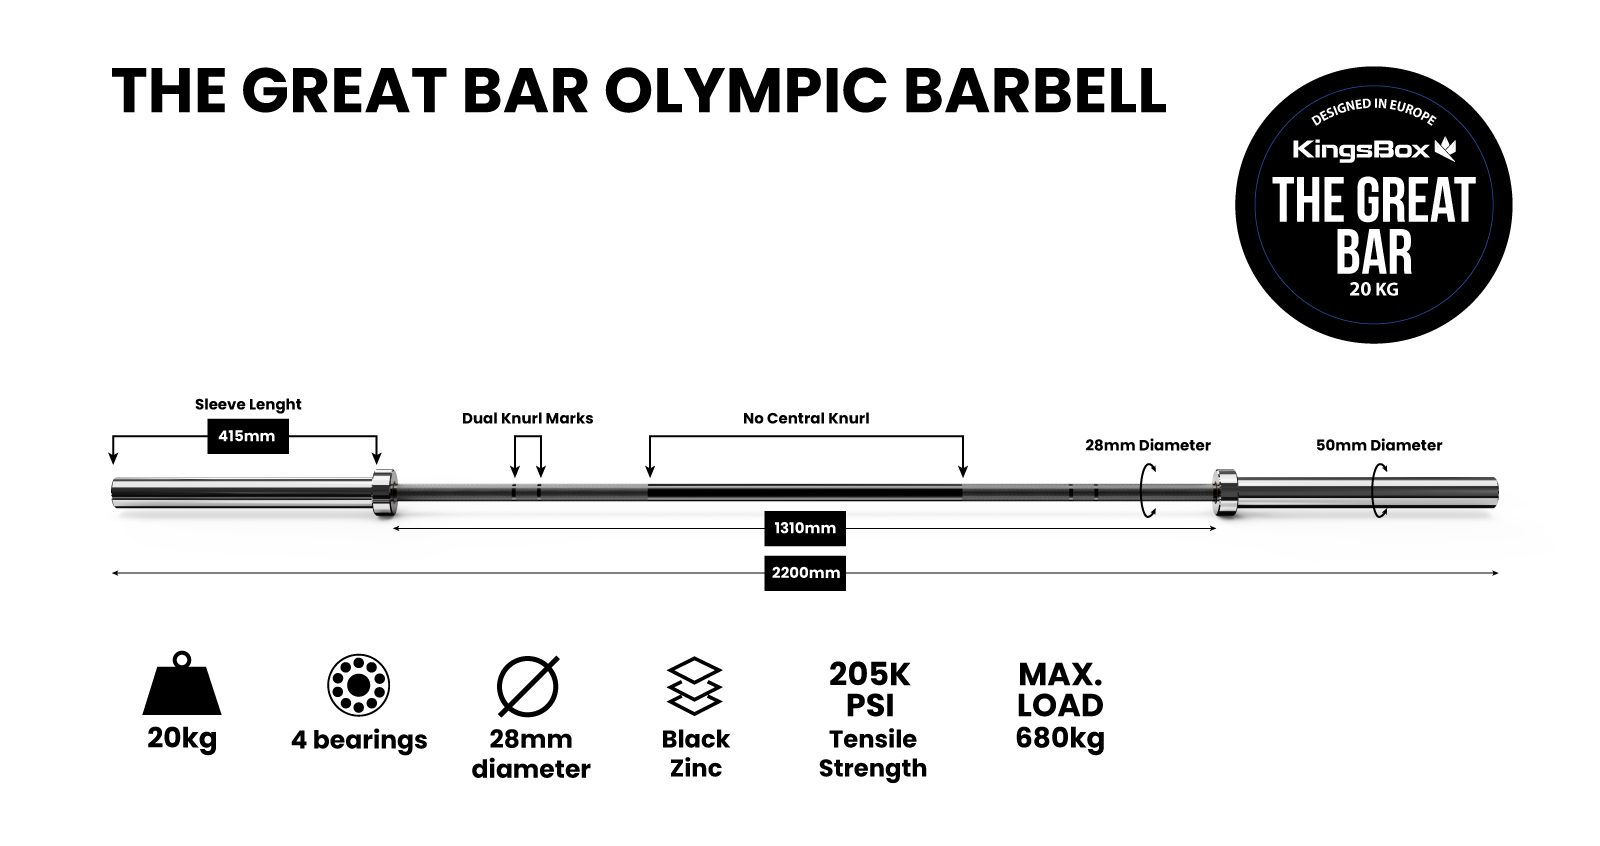 The Great Bar olympic barbell | KingsBox